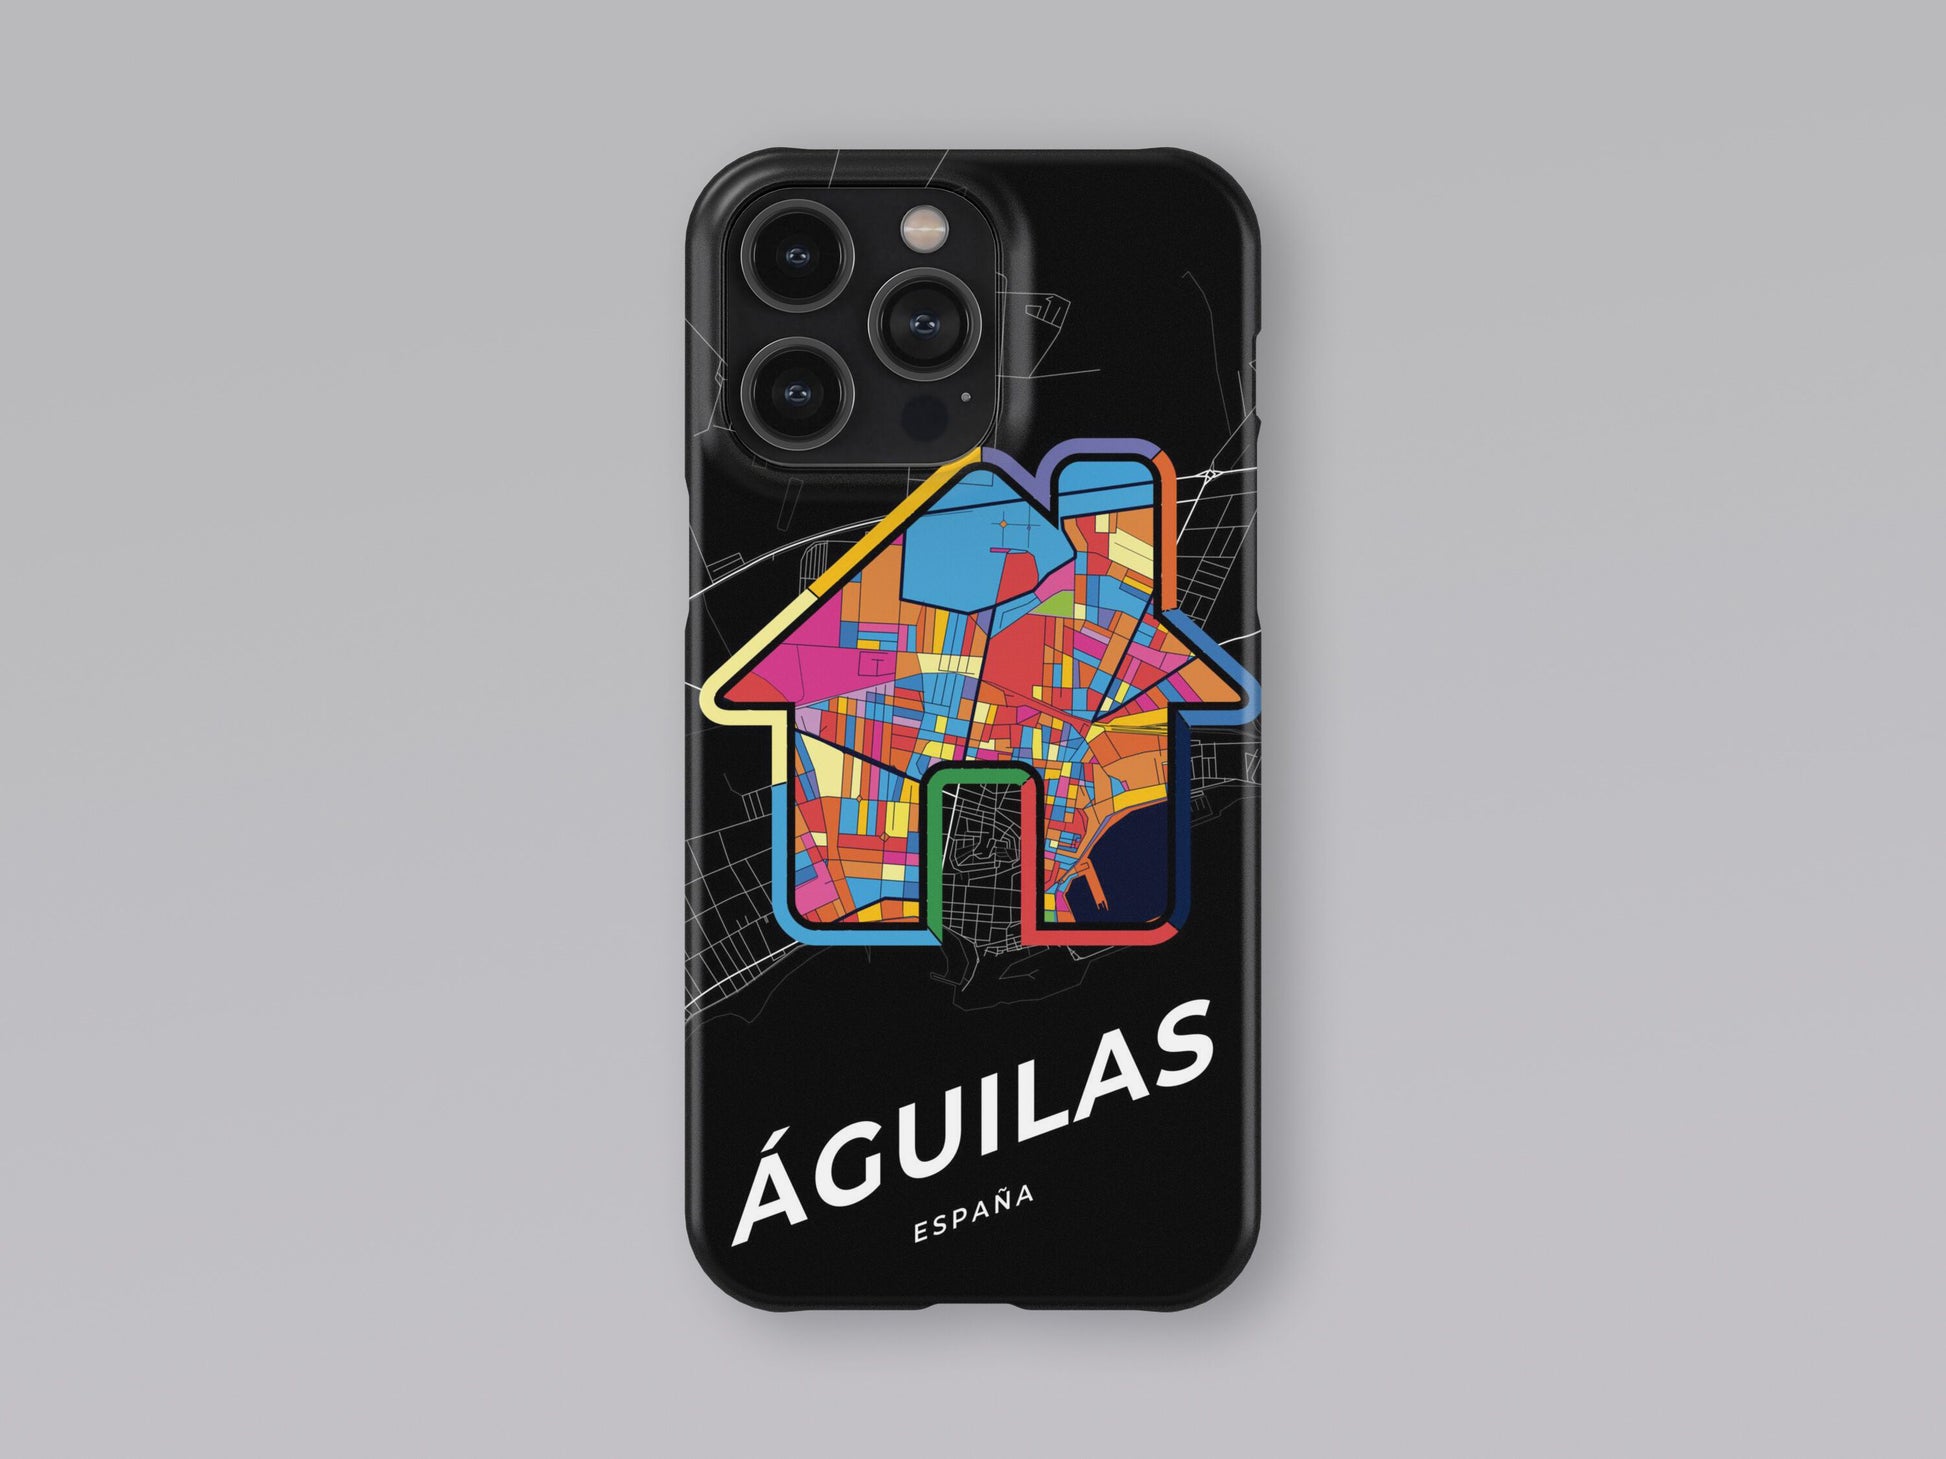 Águilas Spain slim phone case with colorful icon. Birthday, wedding or housewarming gift. Couple match cases. 3